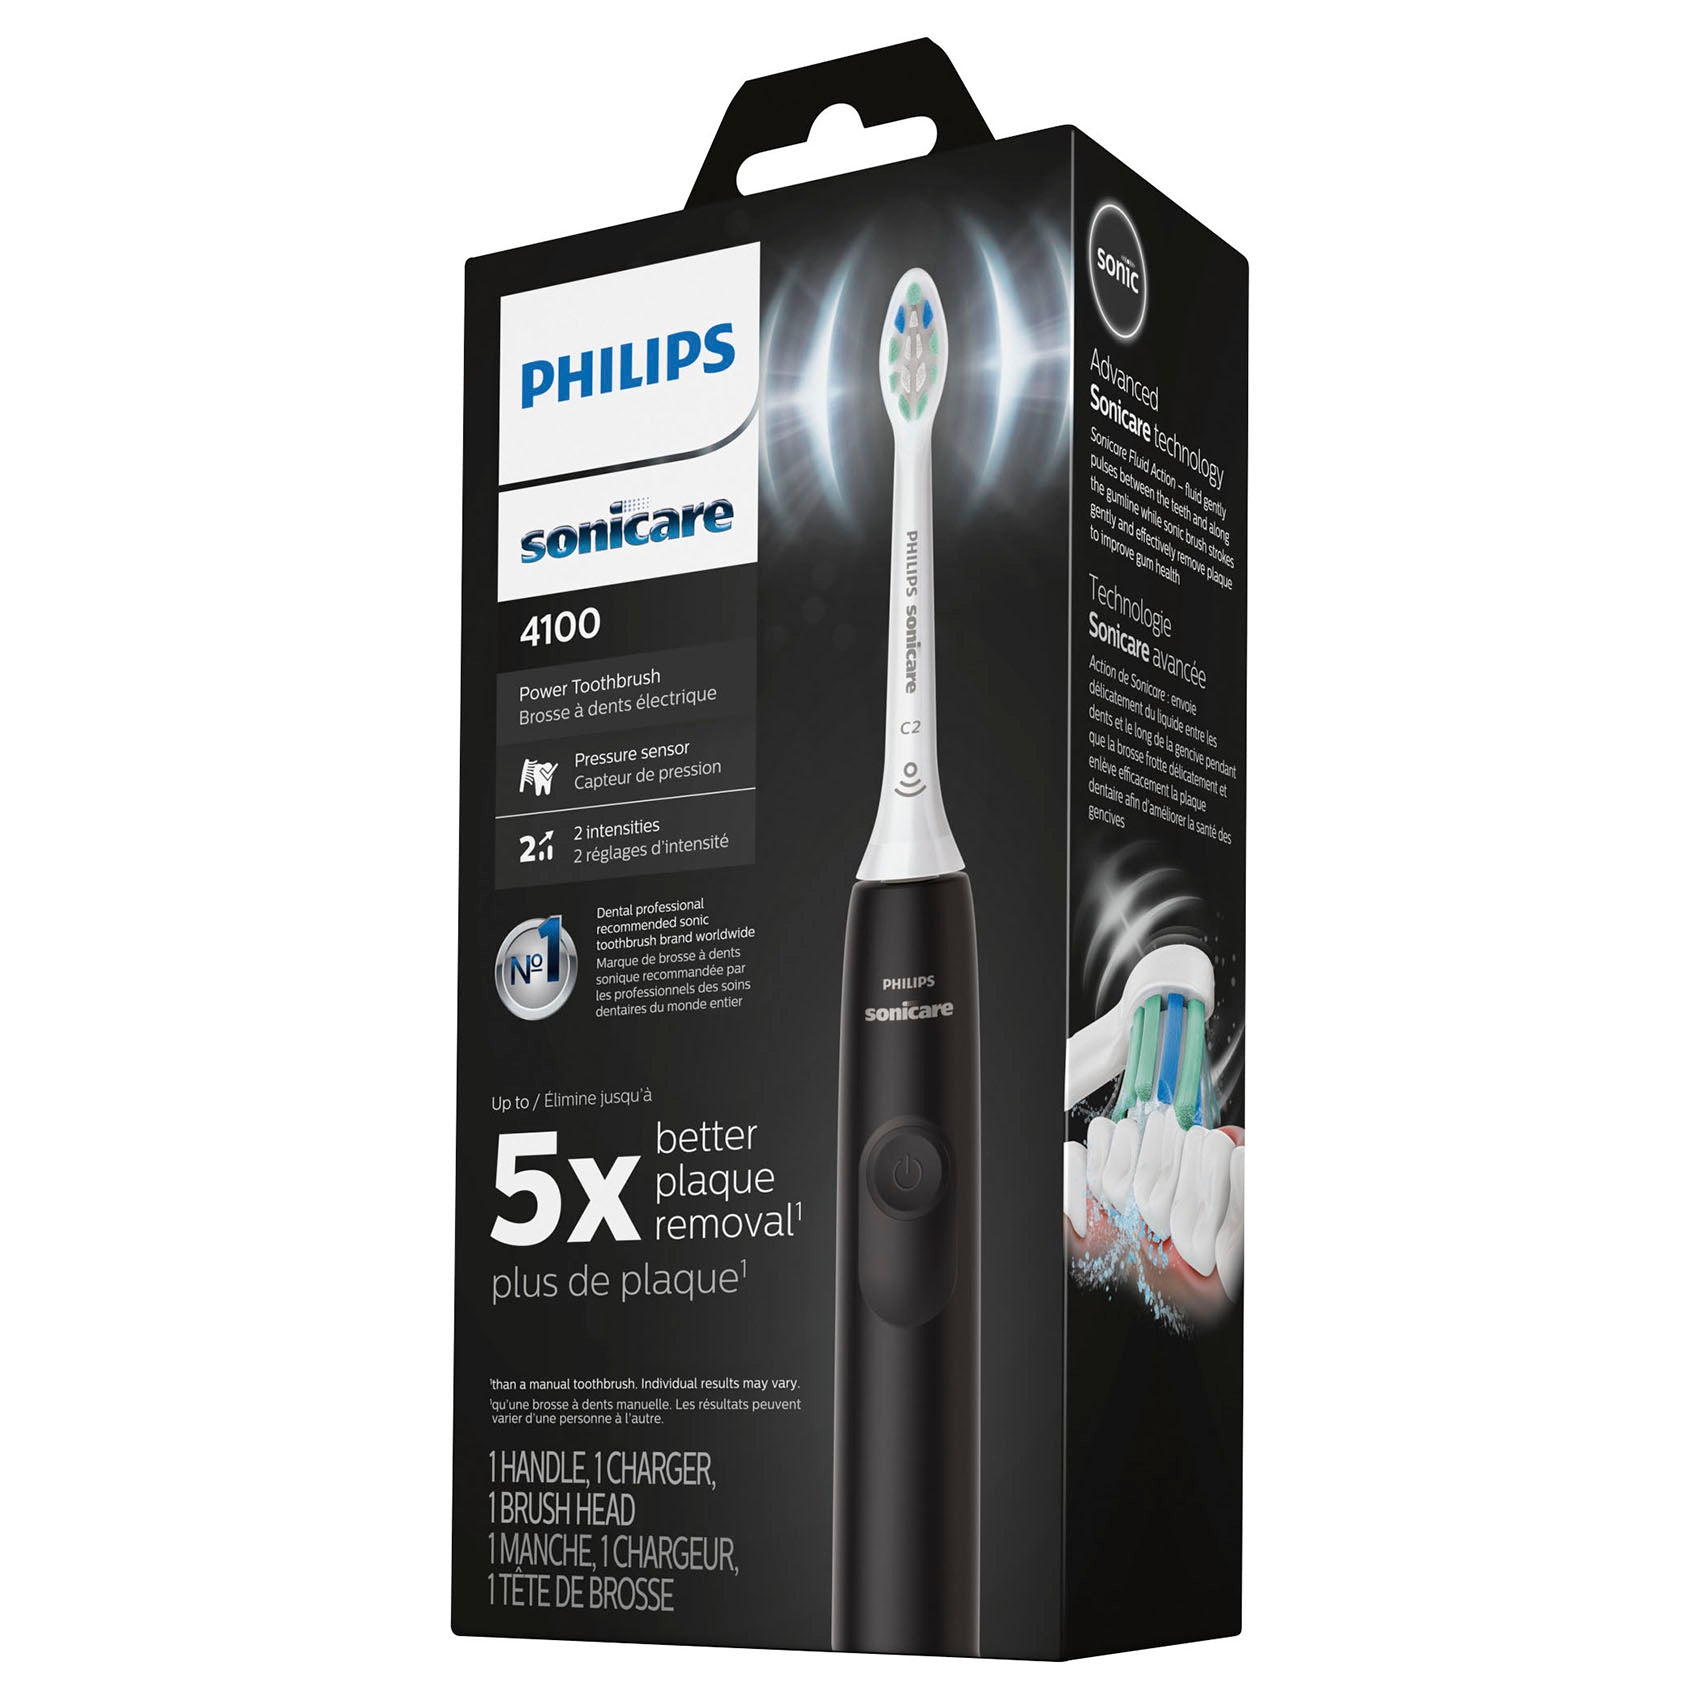 Philips Sonicare 4100 Power Toothbrush, Rechargeable Electric Toothbrush with Pressure Sensor, Black HX3681/24 - Pro-Distributing